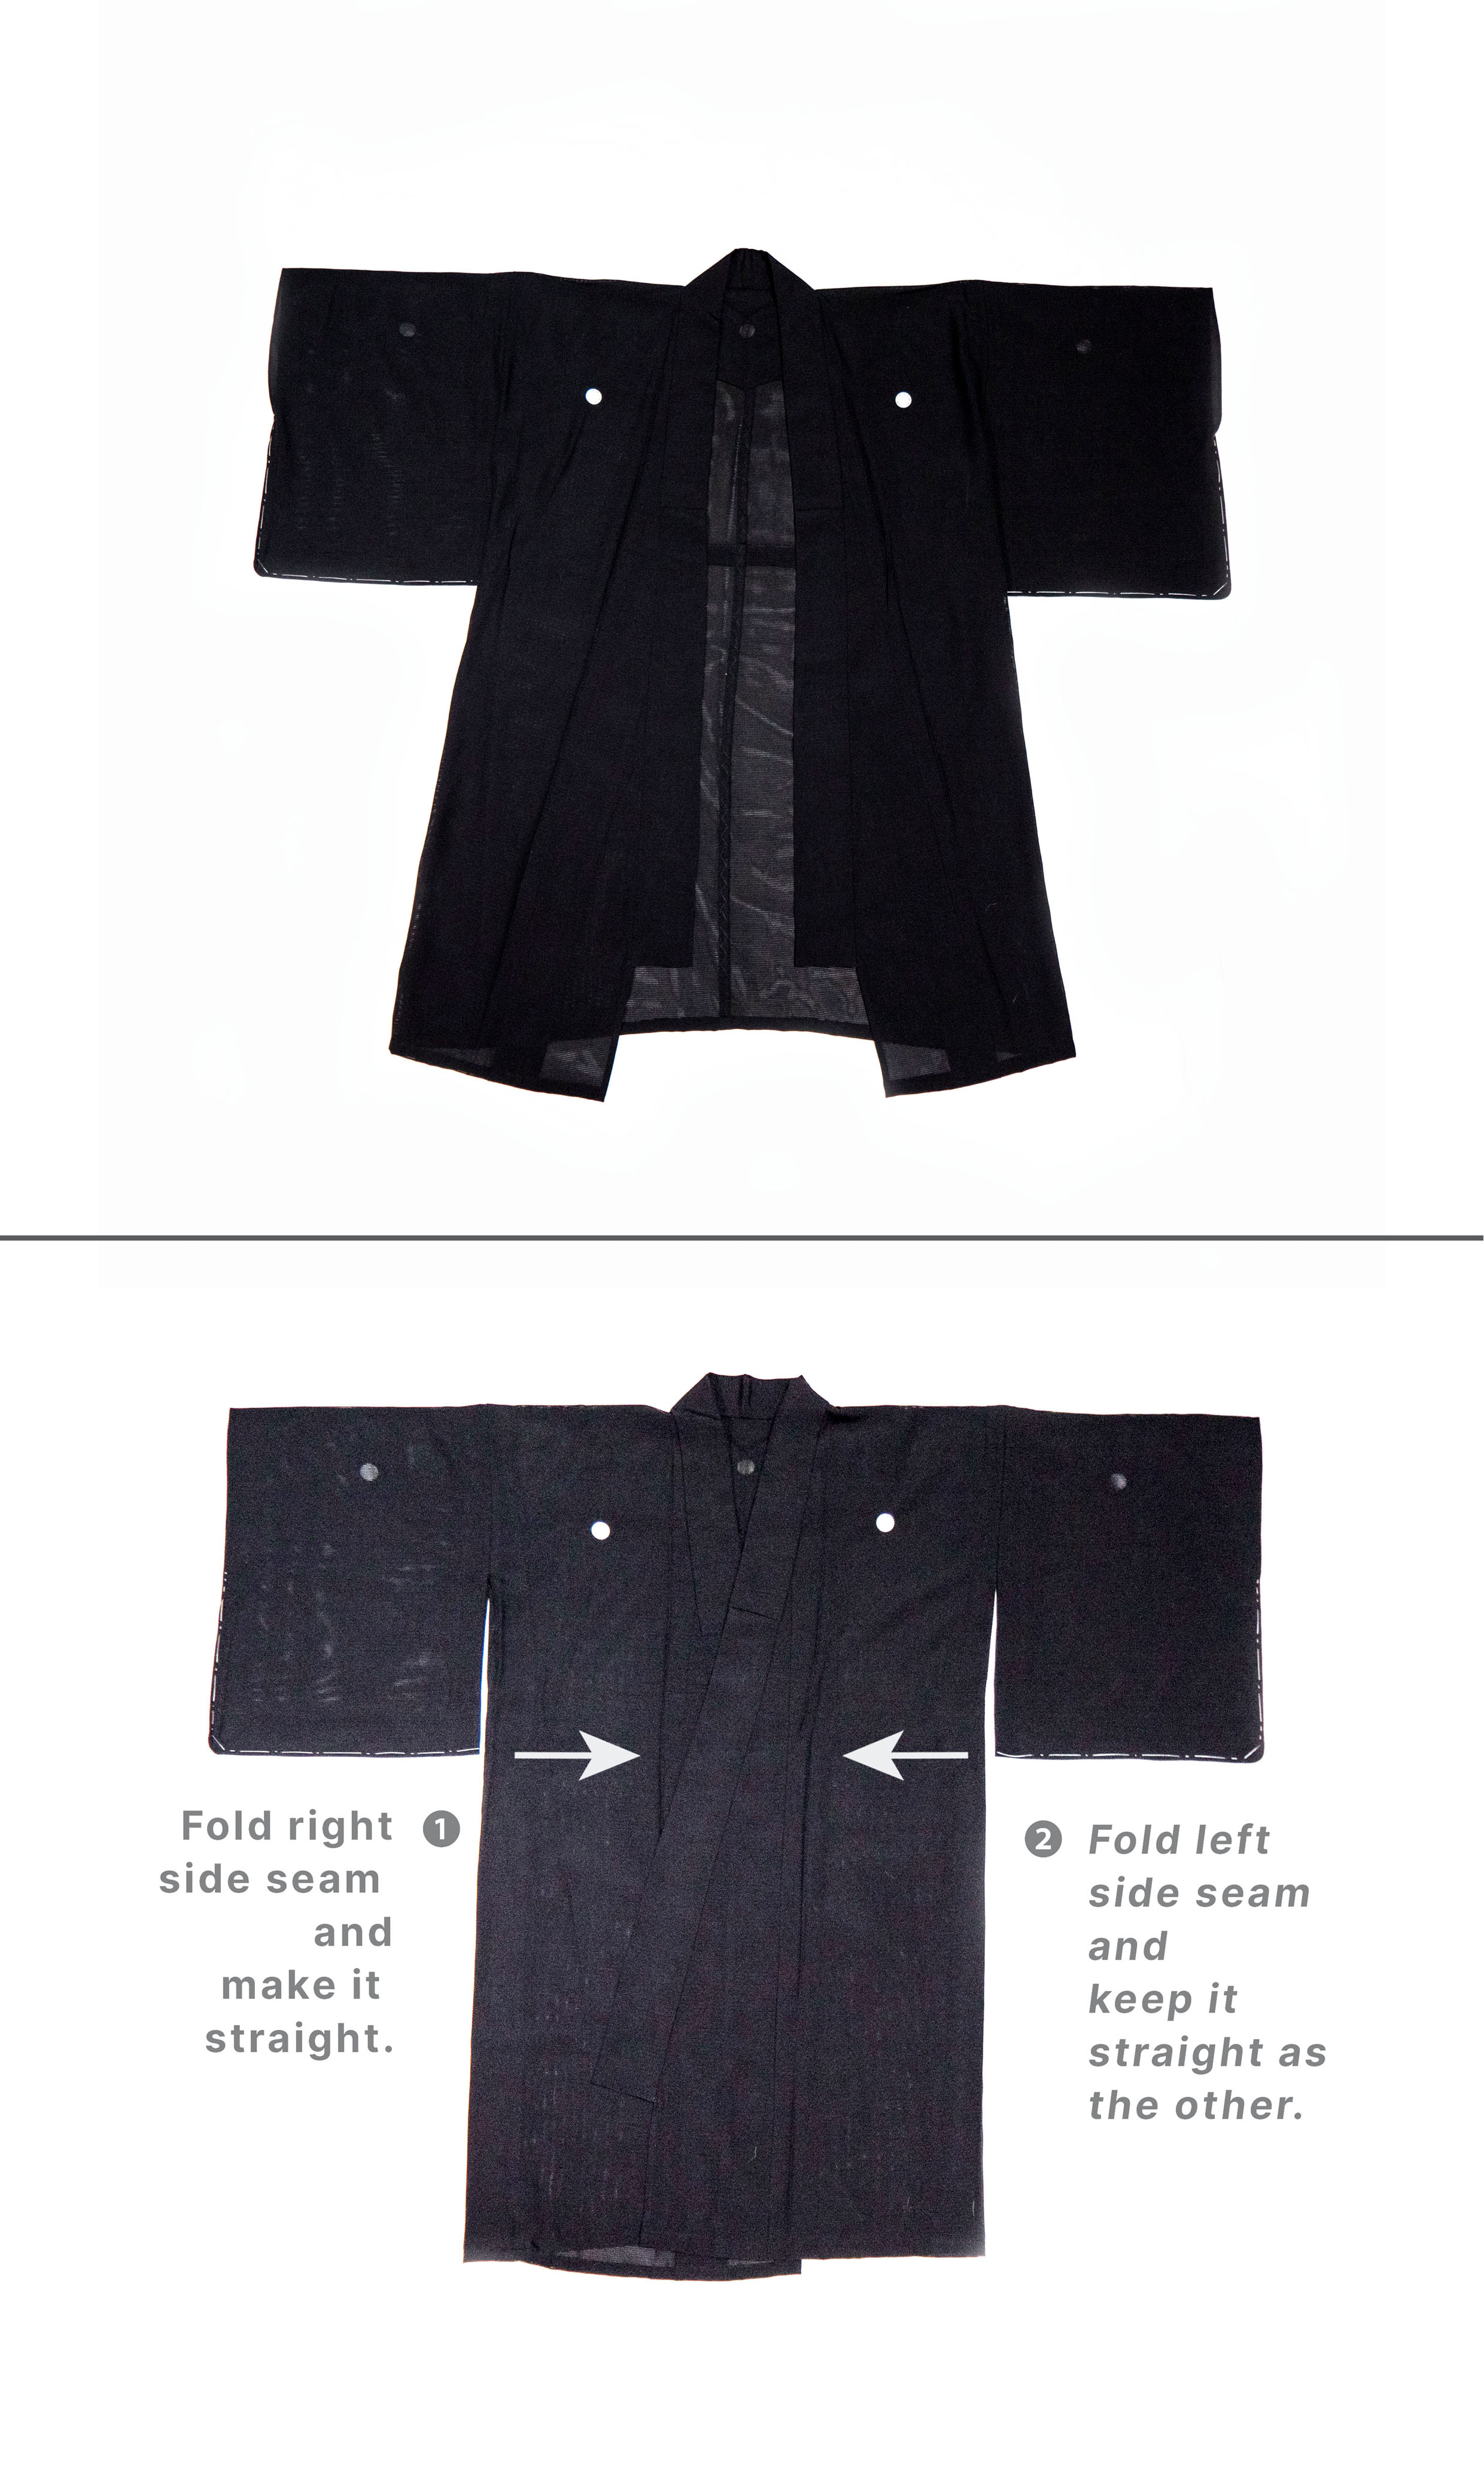 How to fold the kimono in traditional way.